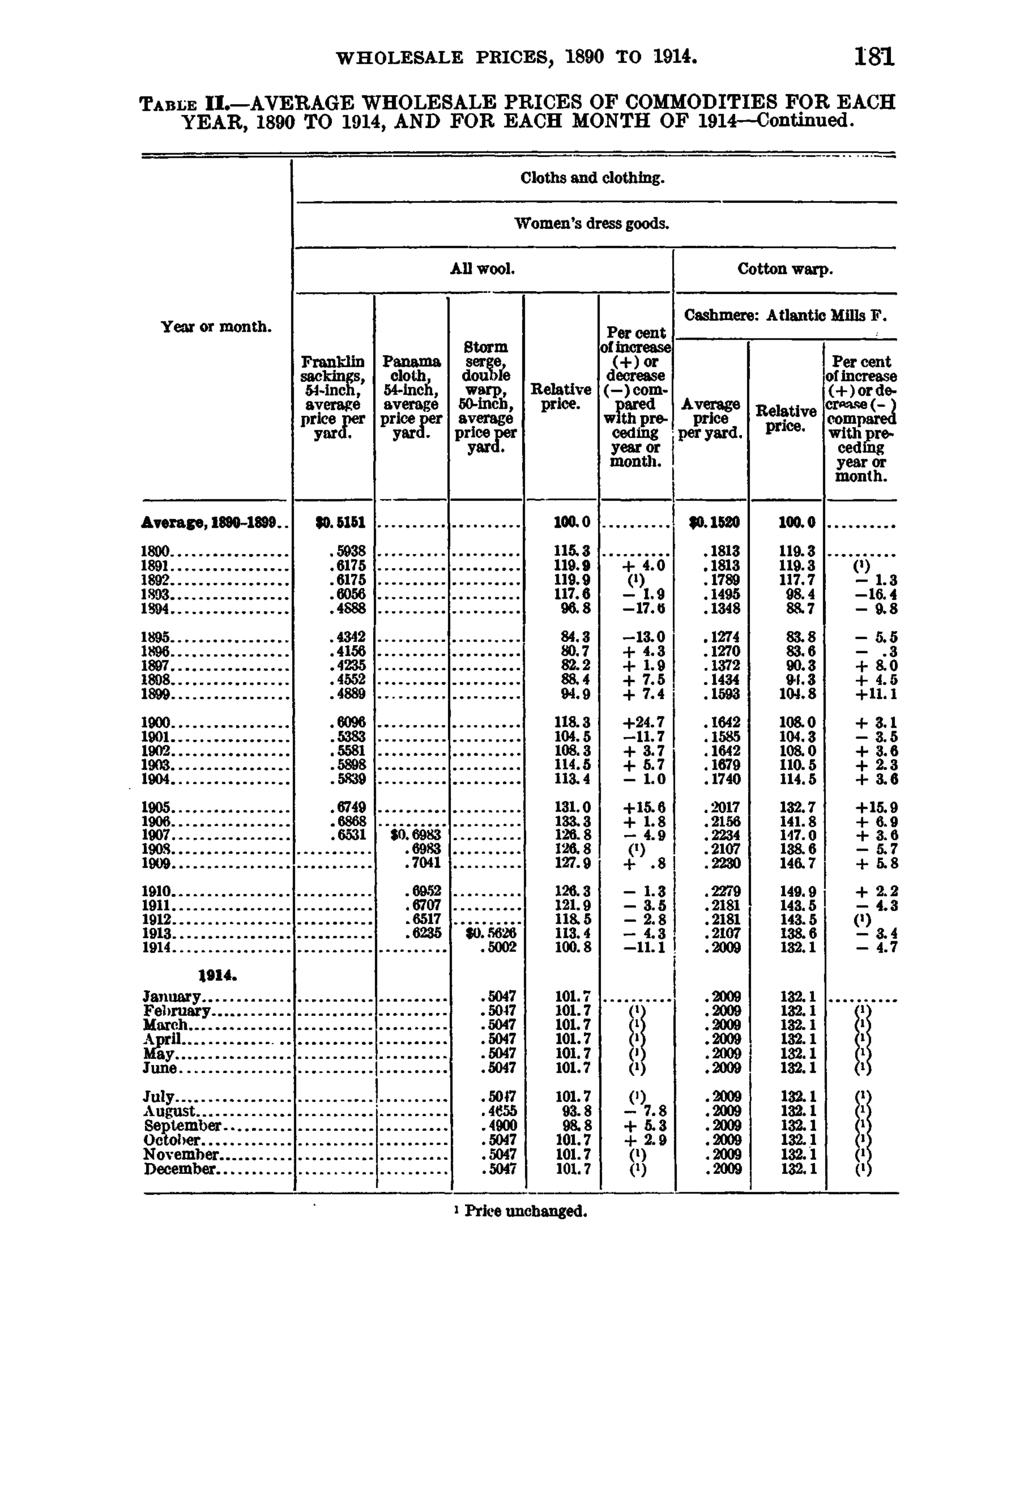 WHOLESALE PRICES, 1890 TO 1 8 1 T a b le II. AVERAGE WHOLESALE PRICES OF COMMODITIES FOR EACH YEAR, 1890 TO 1914, AND FOR EACH MONTH OF 1914 Continued. Cloths and clothing. Women's dress goods.